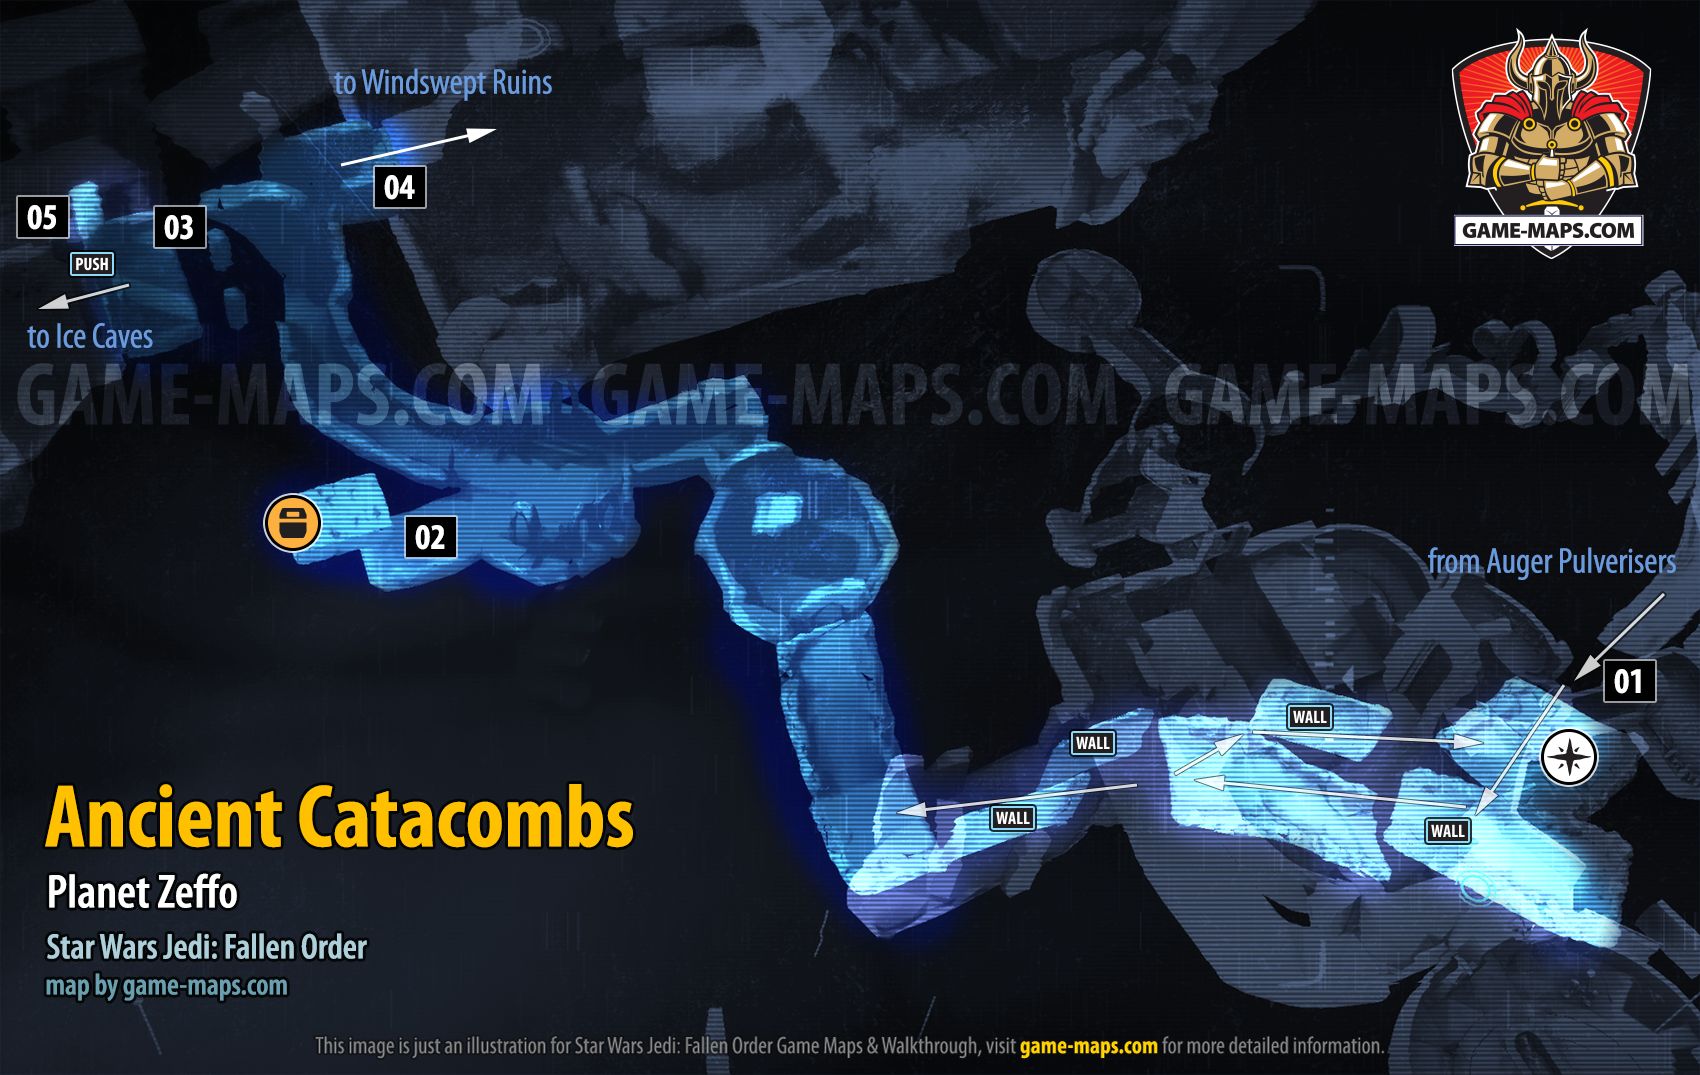 Ancient Catacombs Map, Planet Zeffo for Star Wars Jedi Fallen Order